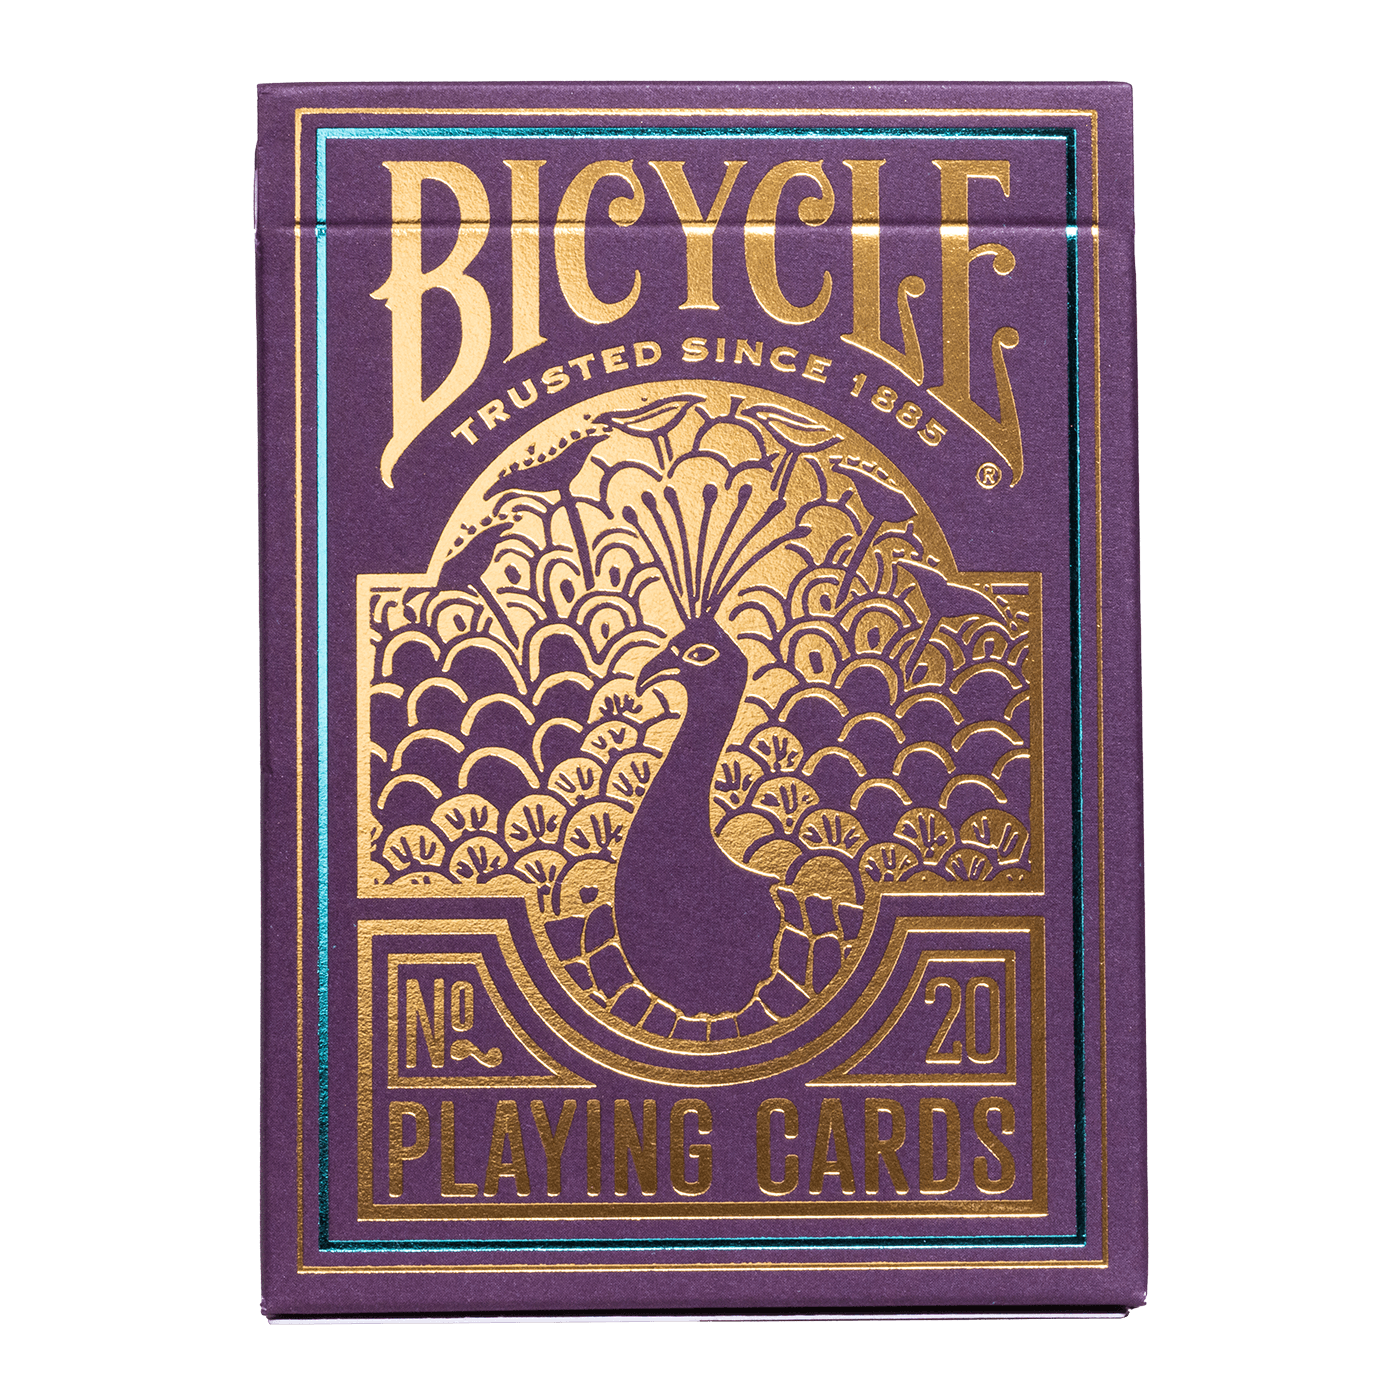 Bicycle Peacock Purple Playing Cards-United States Playing Cards Company-Ace Cards & Collectibles